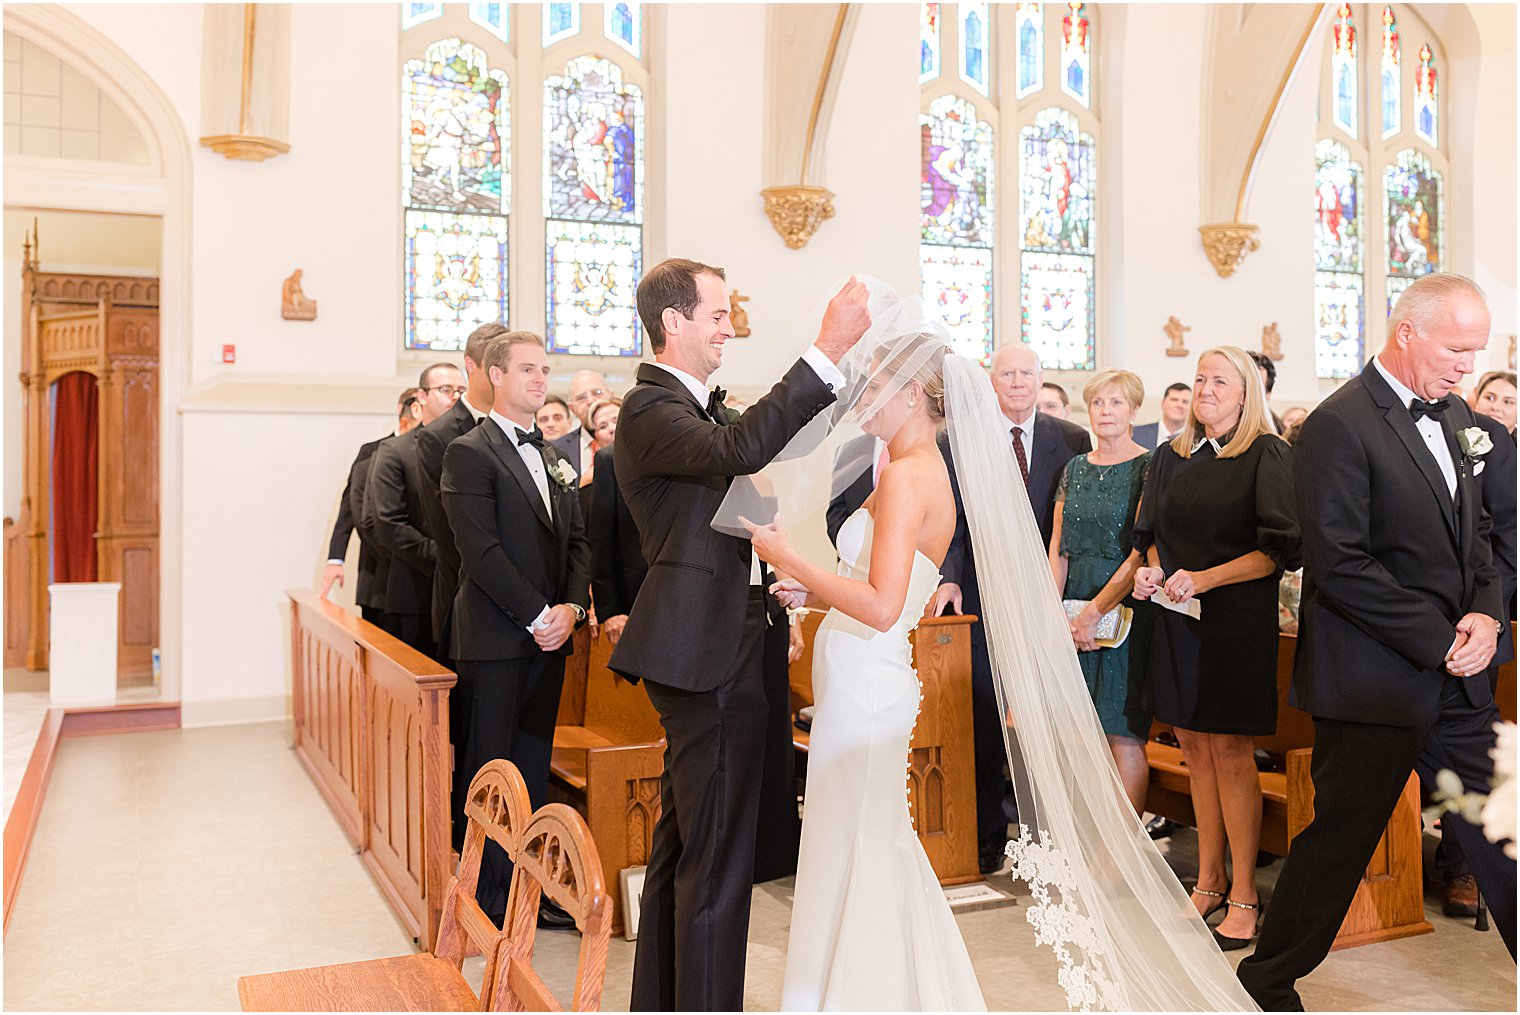 groom helps bride lift veil during traditional church wedding at St. Mary's Catholic Church